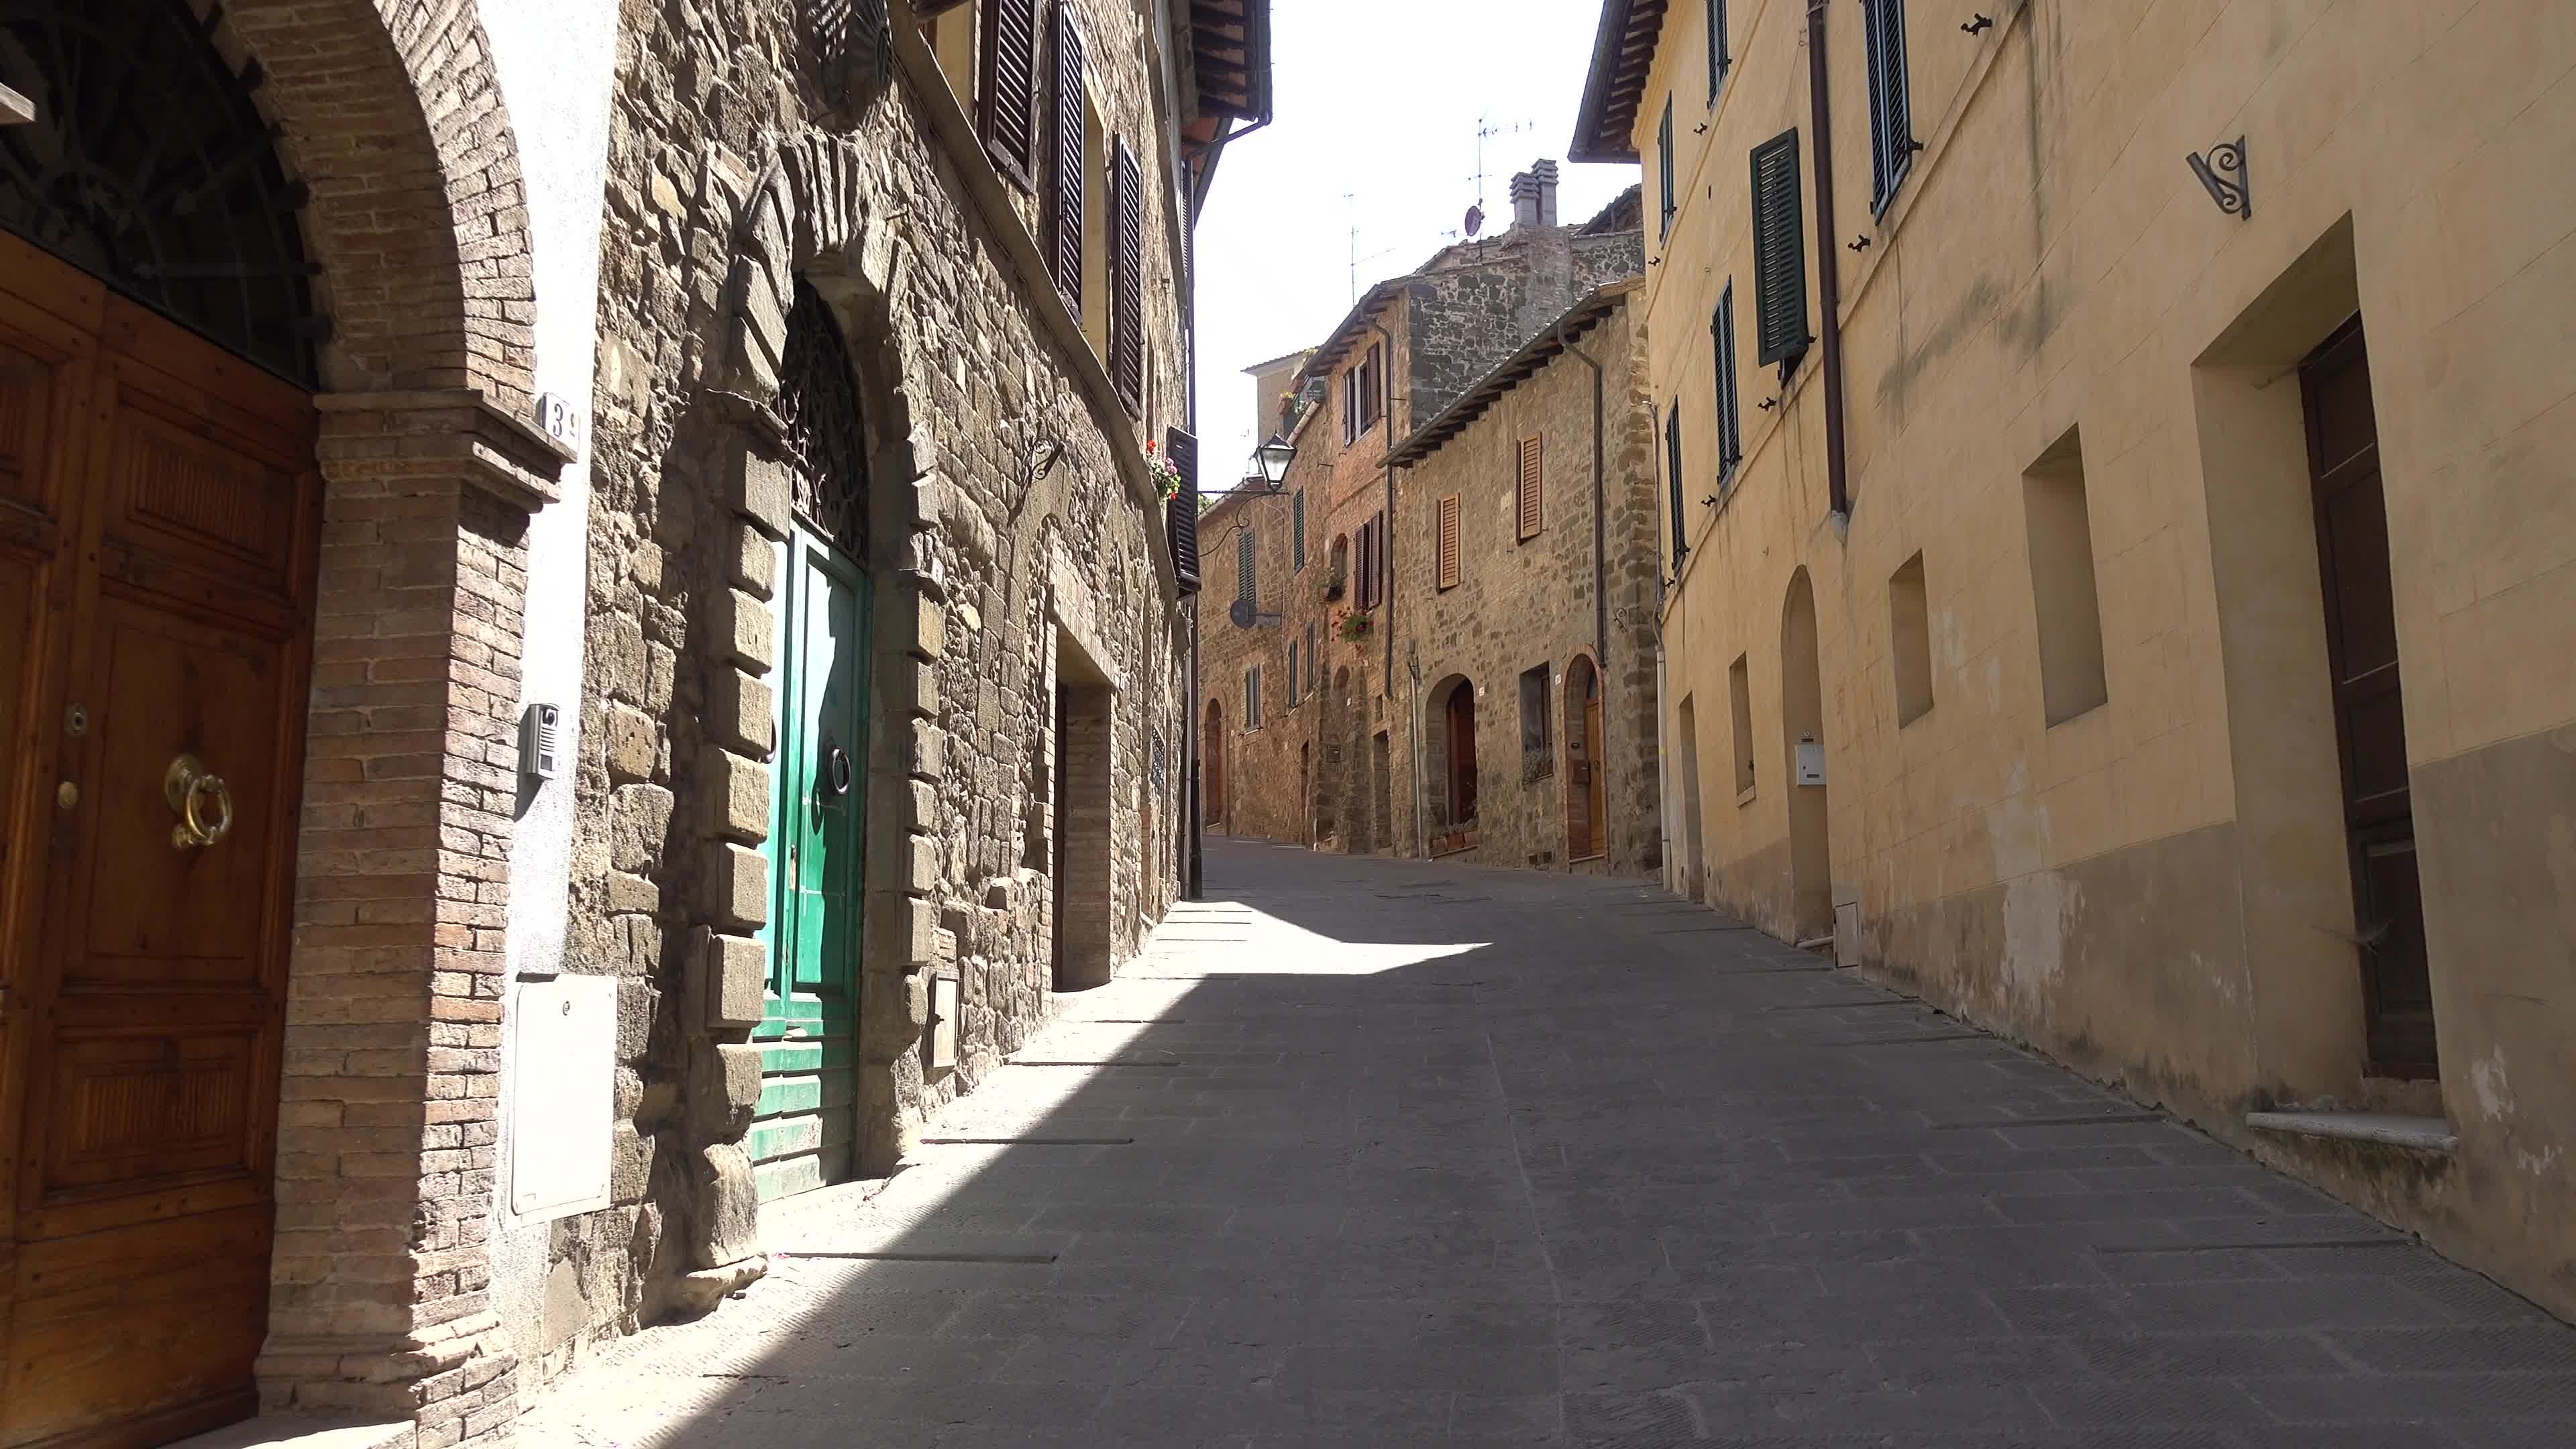 Alley: Cobblestone street and medieval architecture in the village of Montalcino, Tuscany, Italy. 3840x2160 4K Wallpaper.